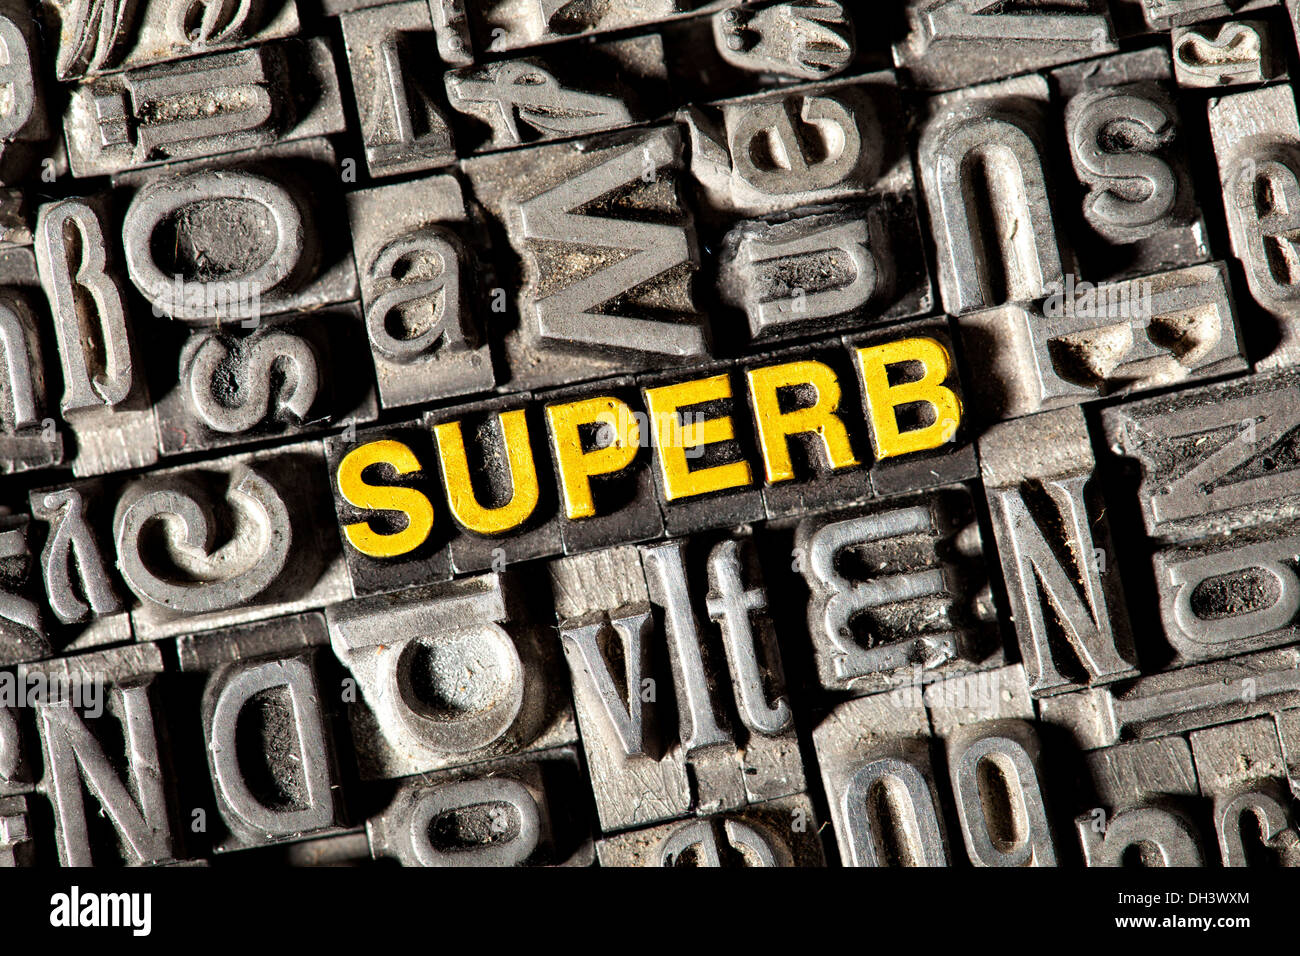 Old lead letters forming the word Superb Stock Photo